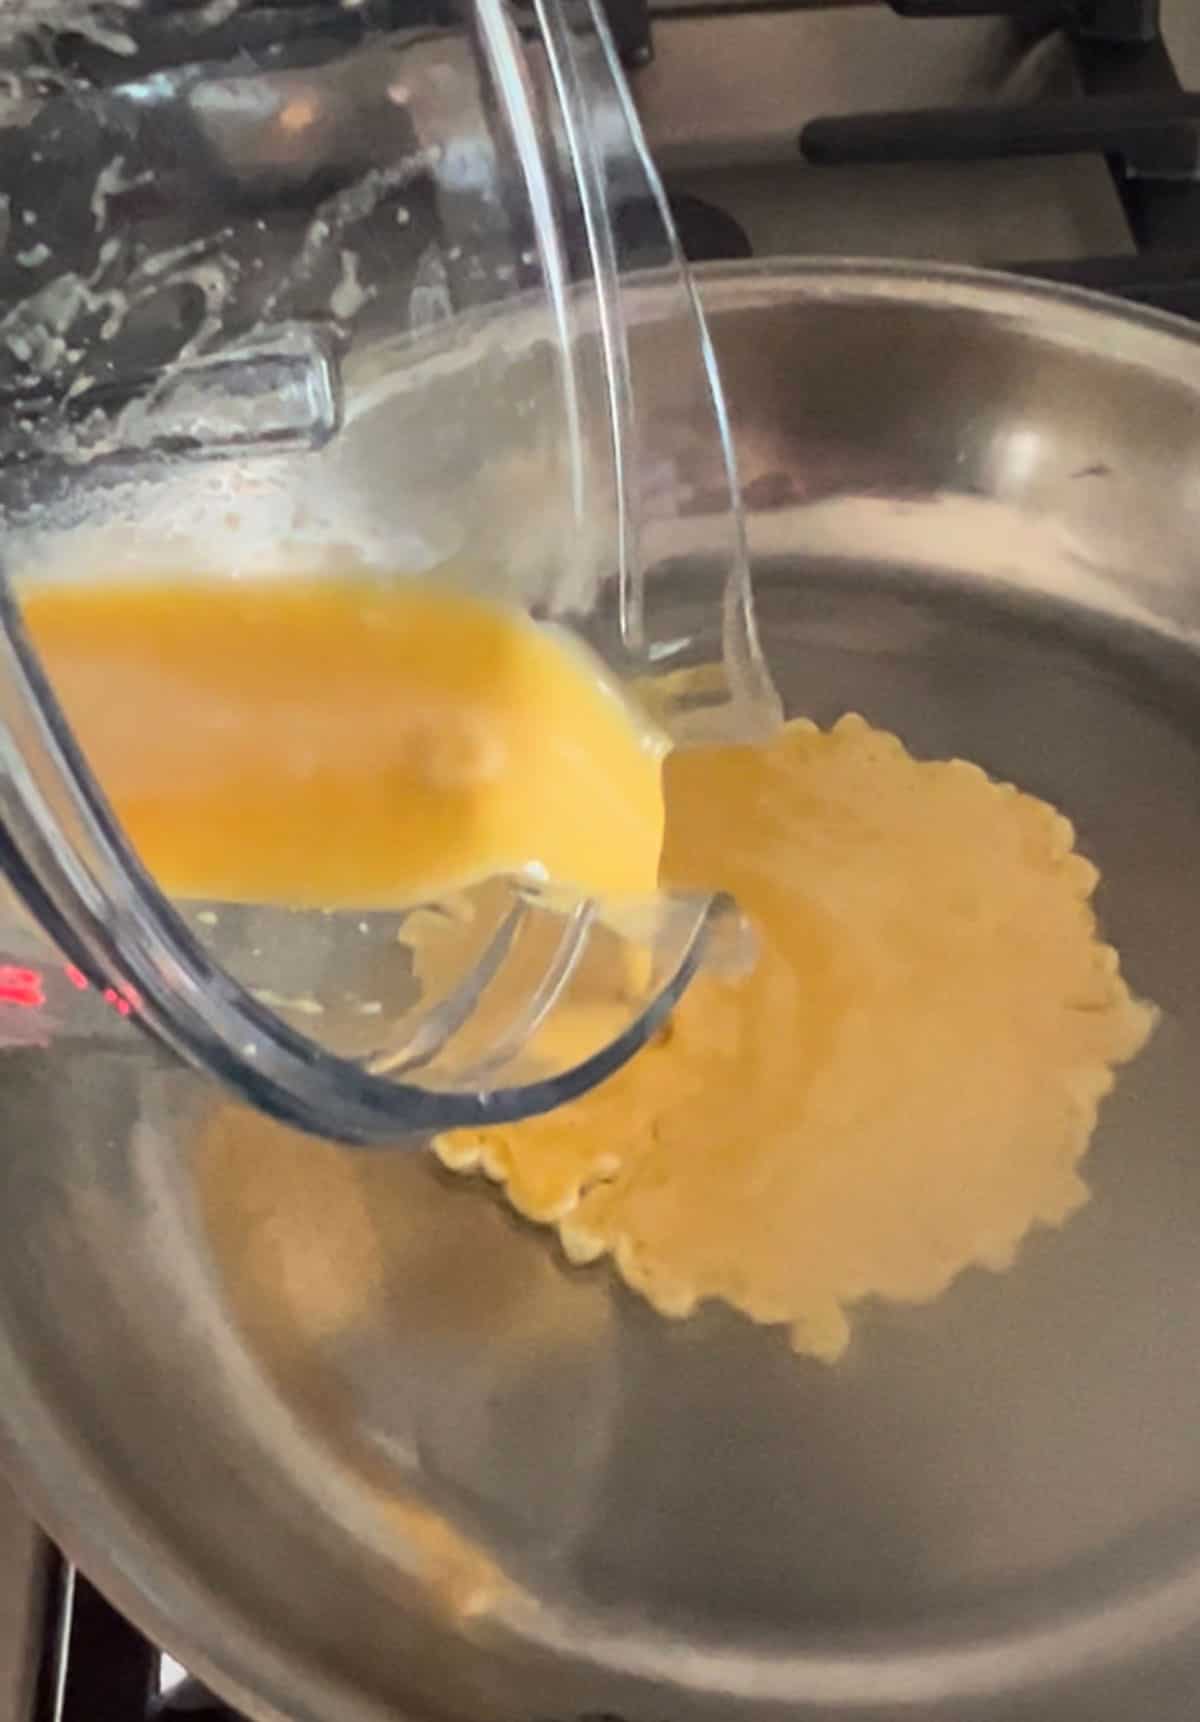 Egg batter being poured from a blender into a hot skillet on the stove